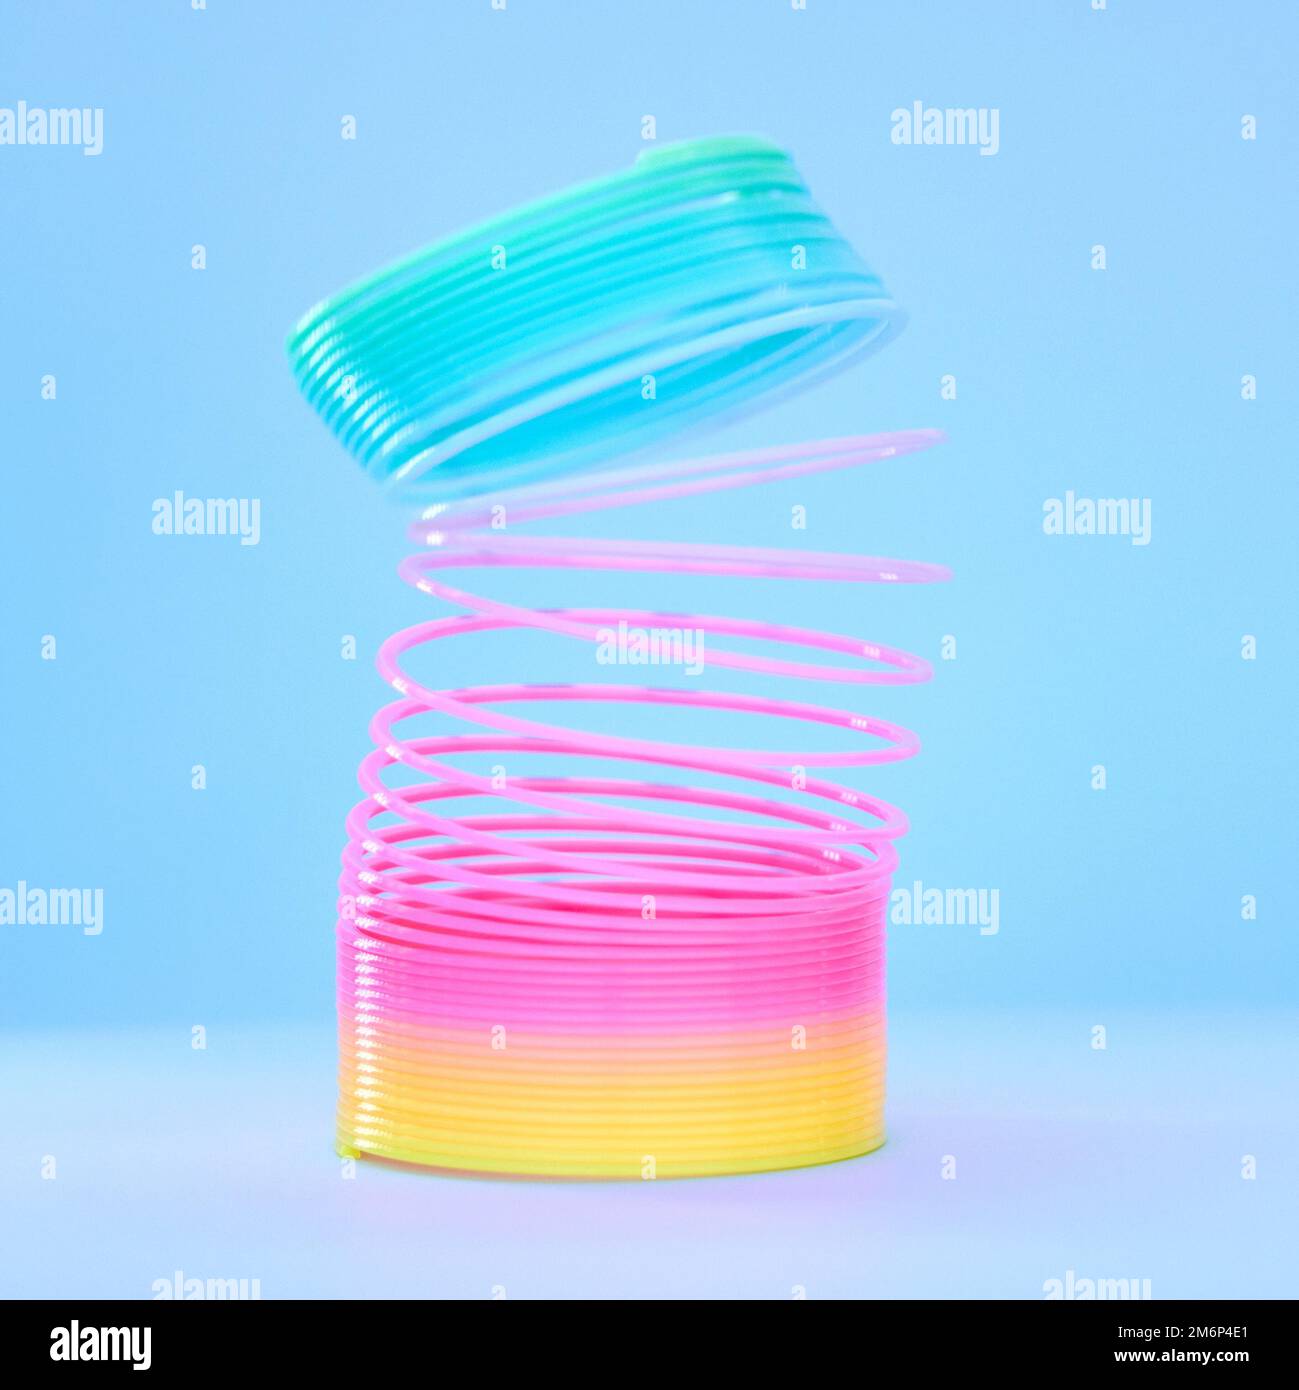 Rainbow slinky toy, spring and plastic product in studio isolated against a blue background mockup. Flexible toys, colorful spirals and childhood item Stock Photo